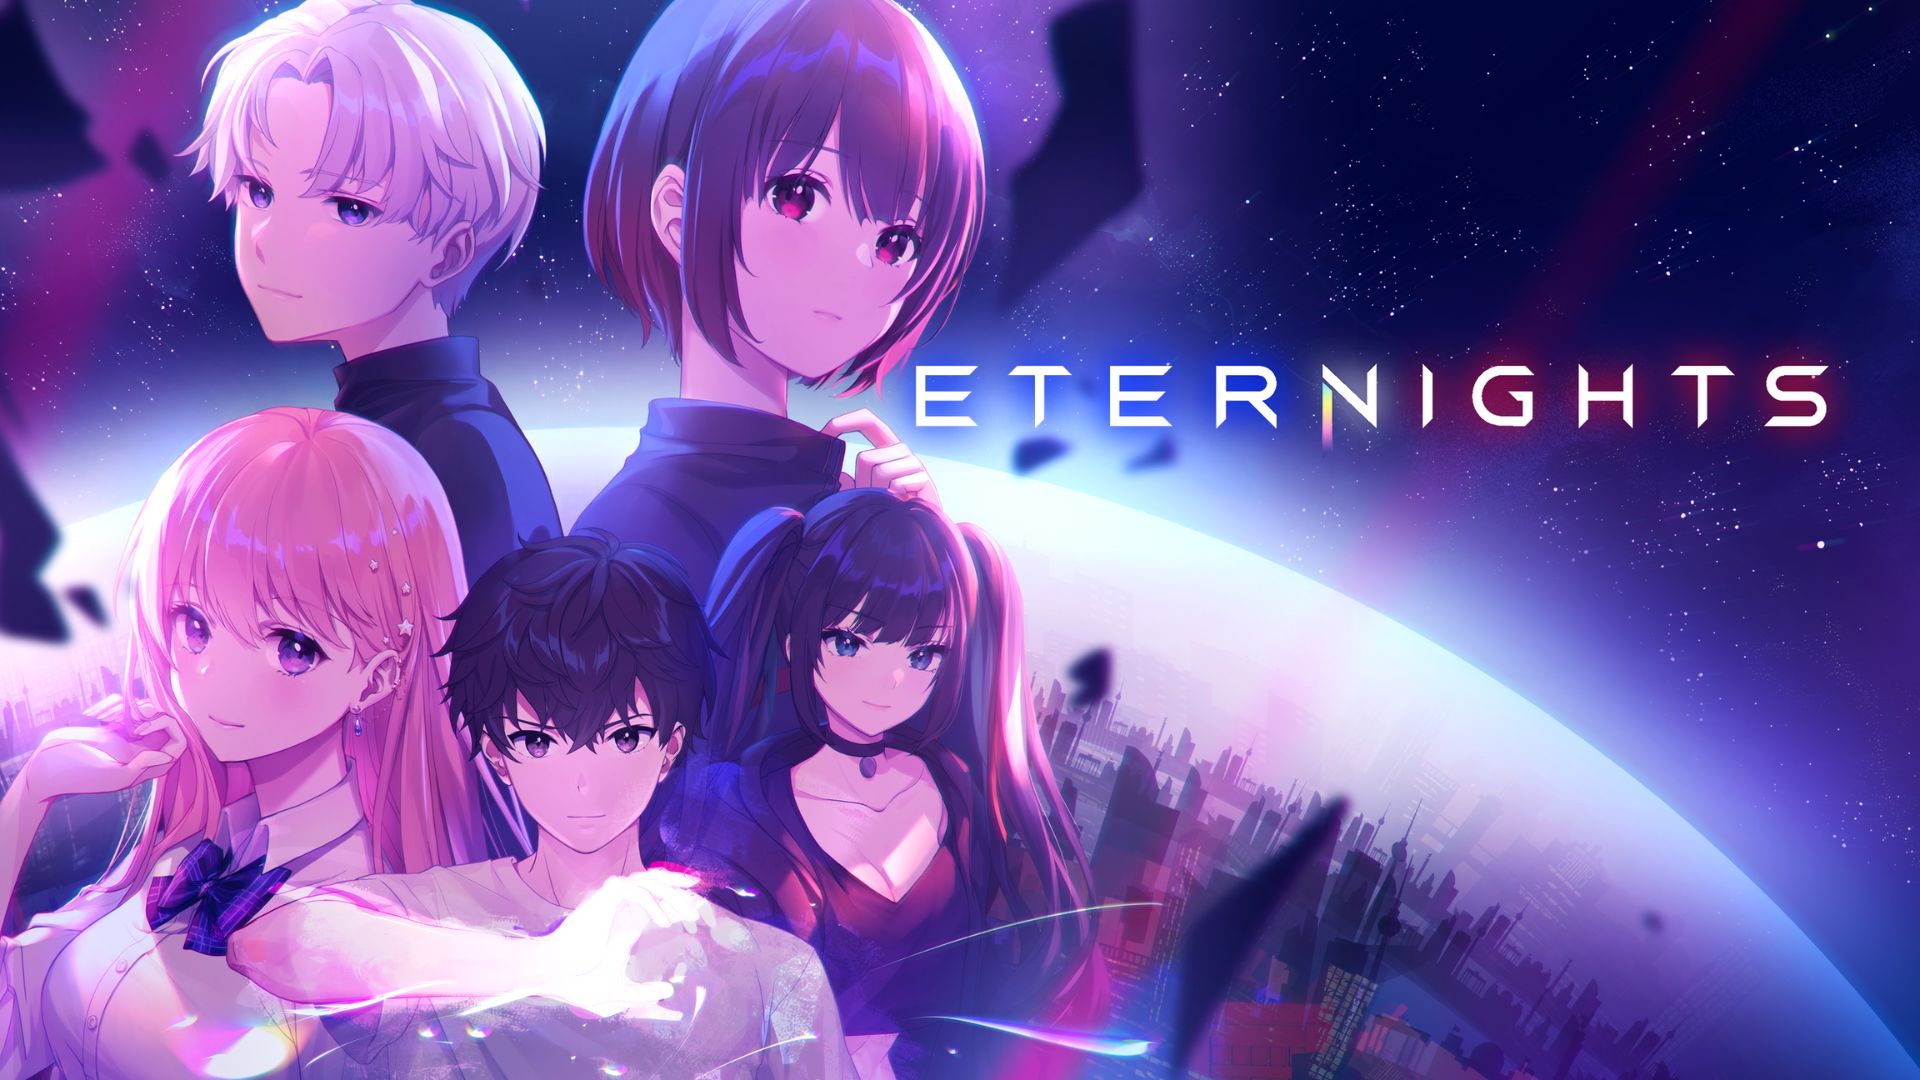 Eternights is an Action Dating Game Coming to PC and PlayStation in September